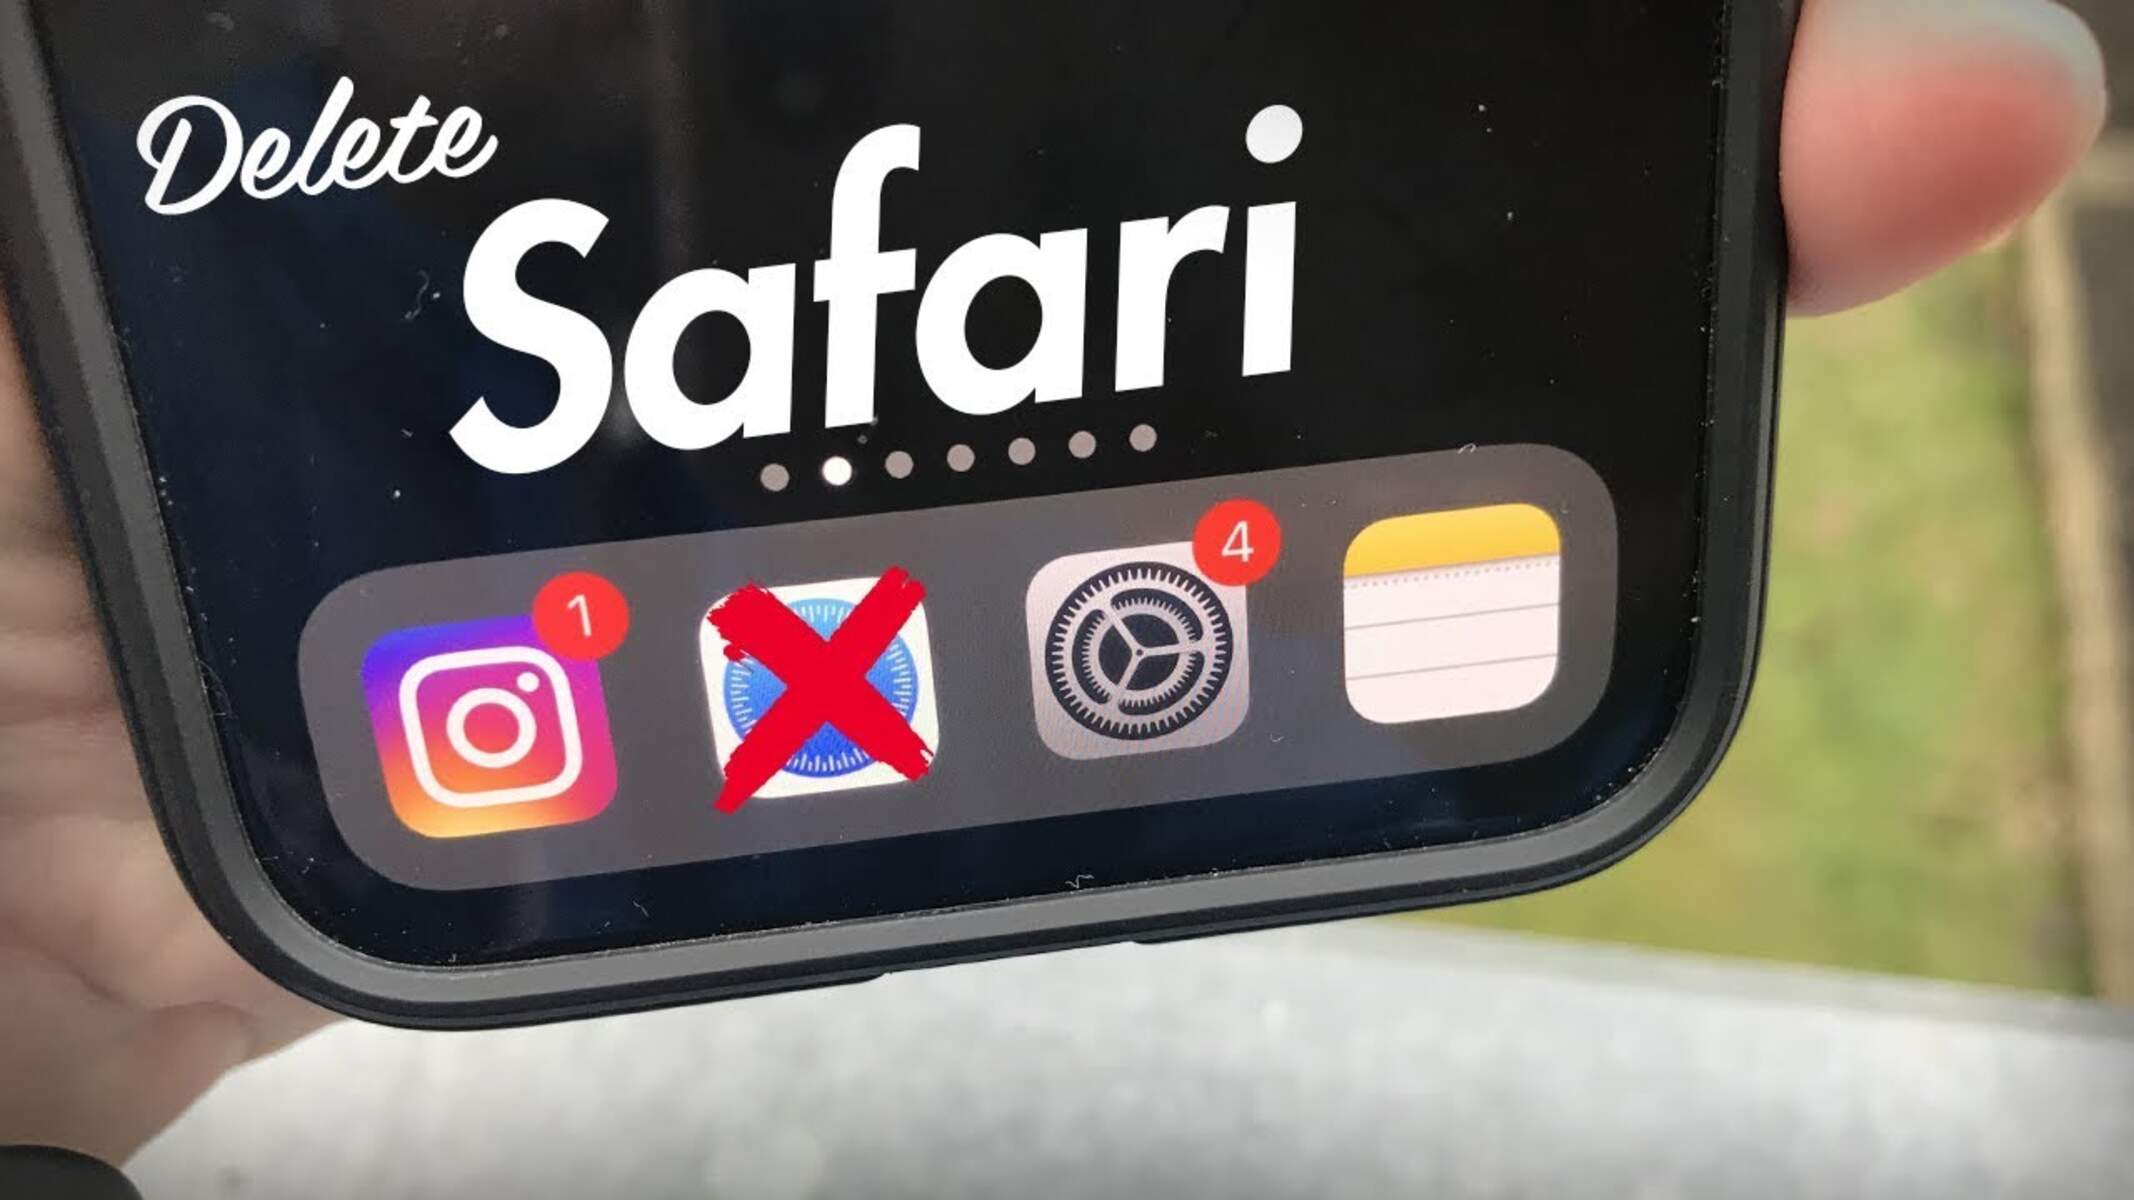 How To Delete Safari From Your Phone